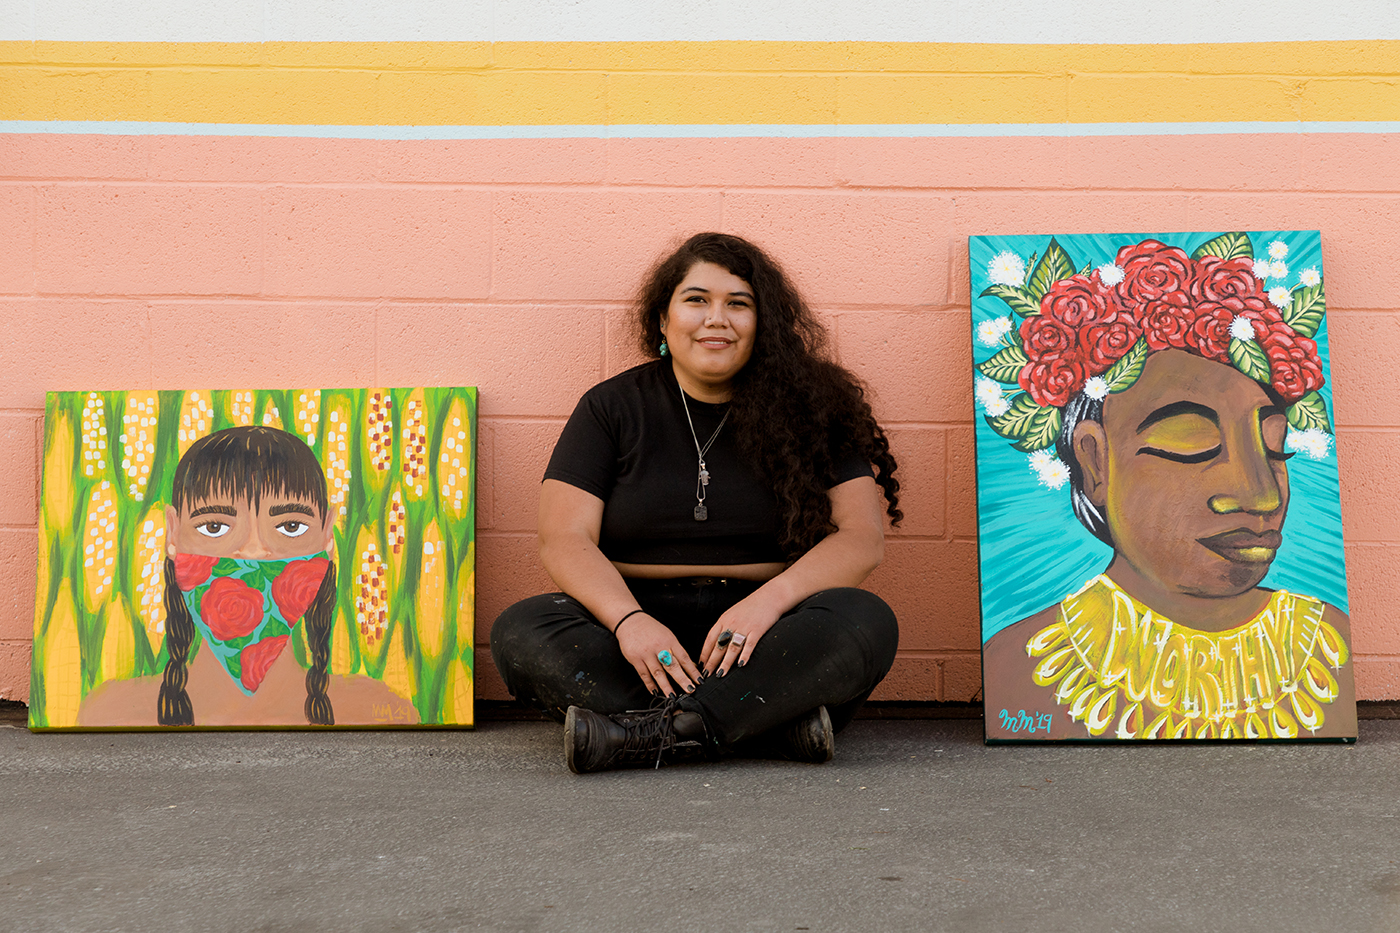 When creating, Mariella Mendoza strives to nd a happy medium between colorful imagery that still communicates the challenges they face in life.